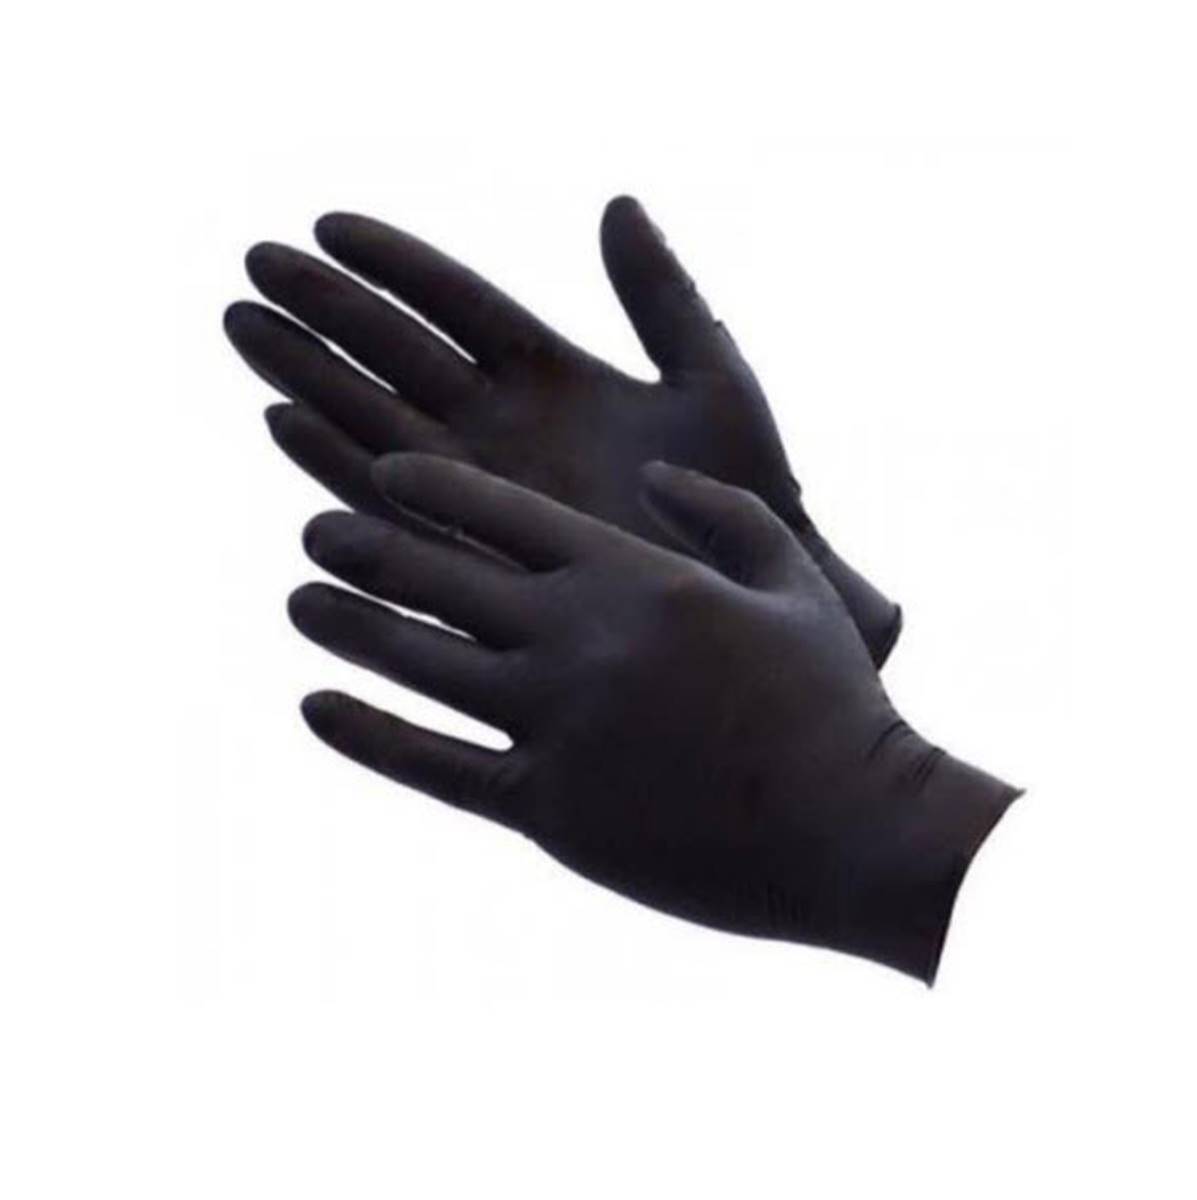 SafePath Large Black Medium Duty 5 mil Nitrile Powder-Free Disposable Exam Gloves (100 Gloves Per Box) (Limited quantities avail